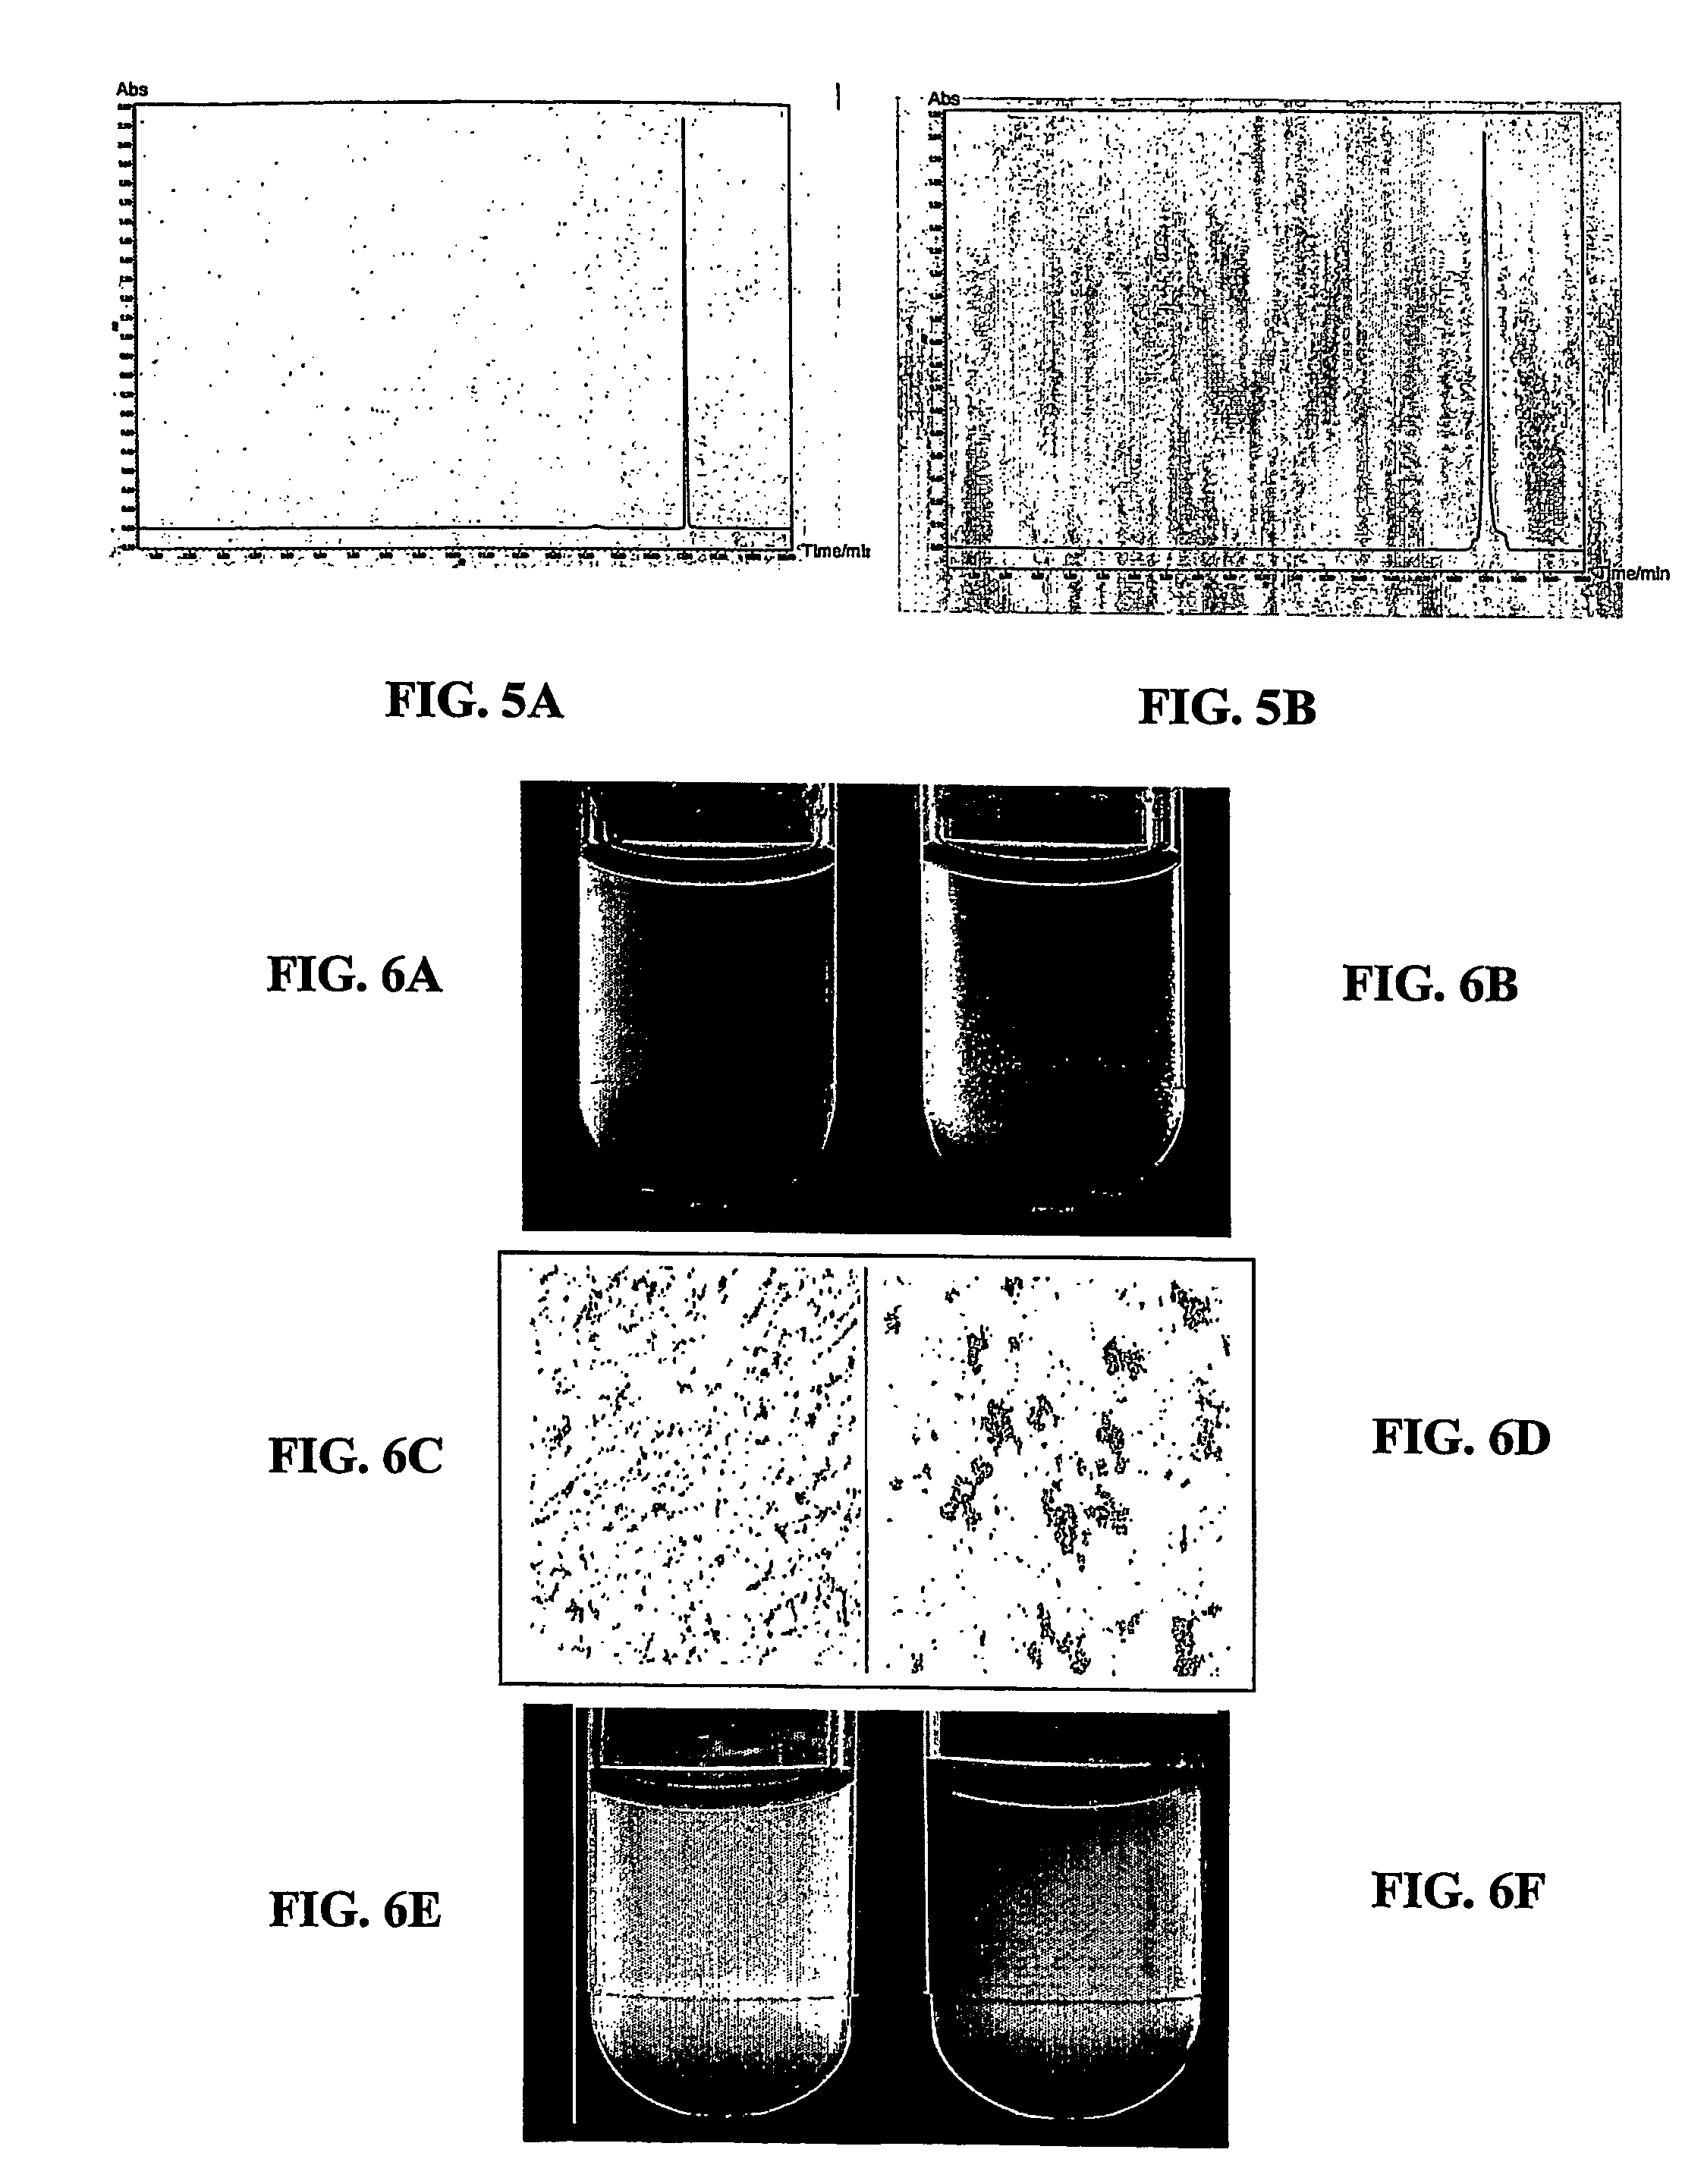 Method for attentuating virulence of microbial pathogens and for inhibiting microbial biofilm formation